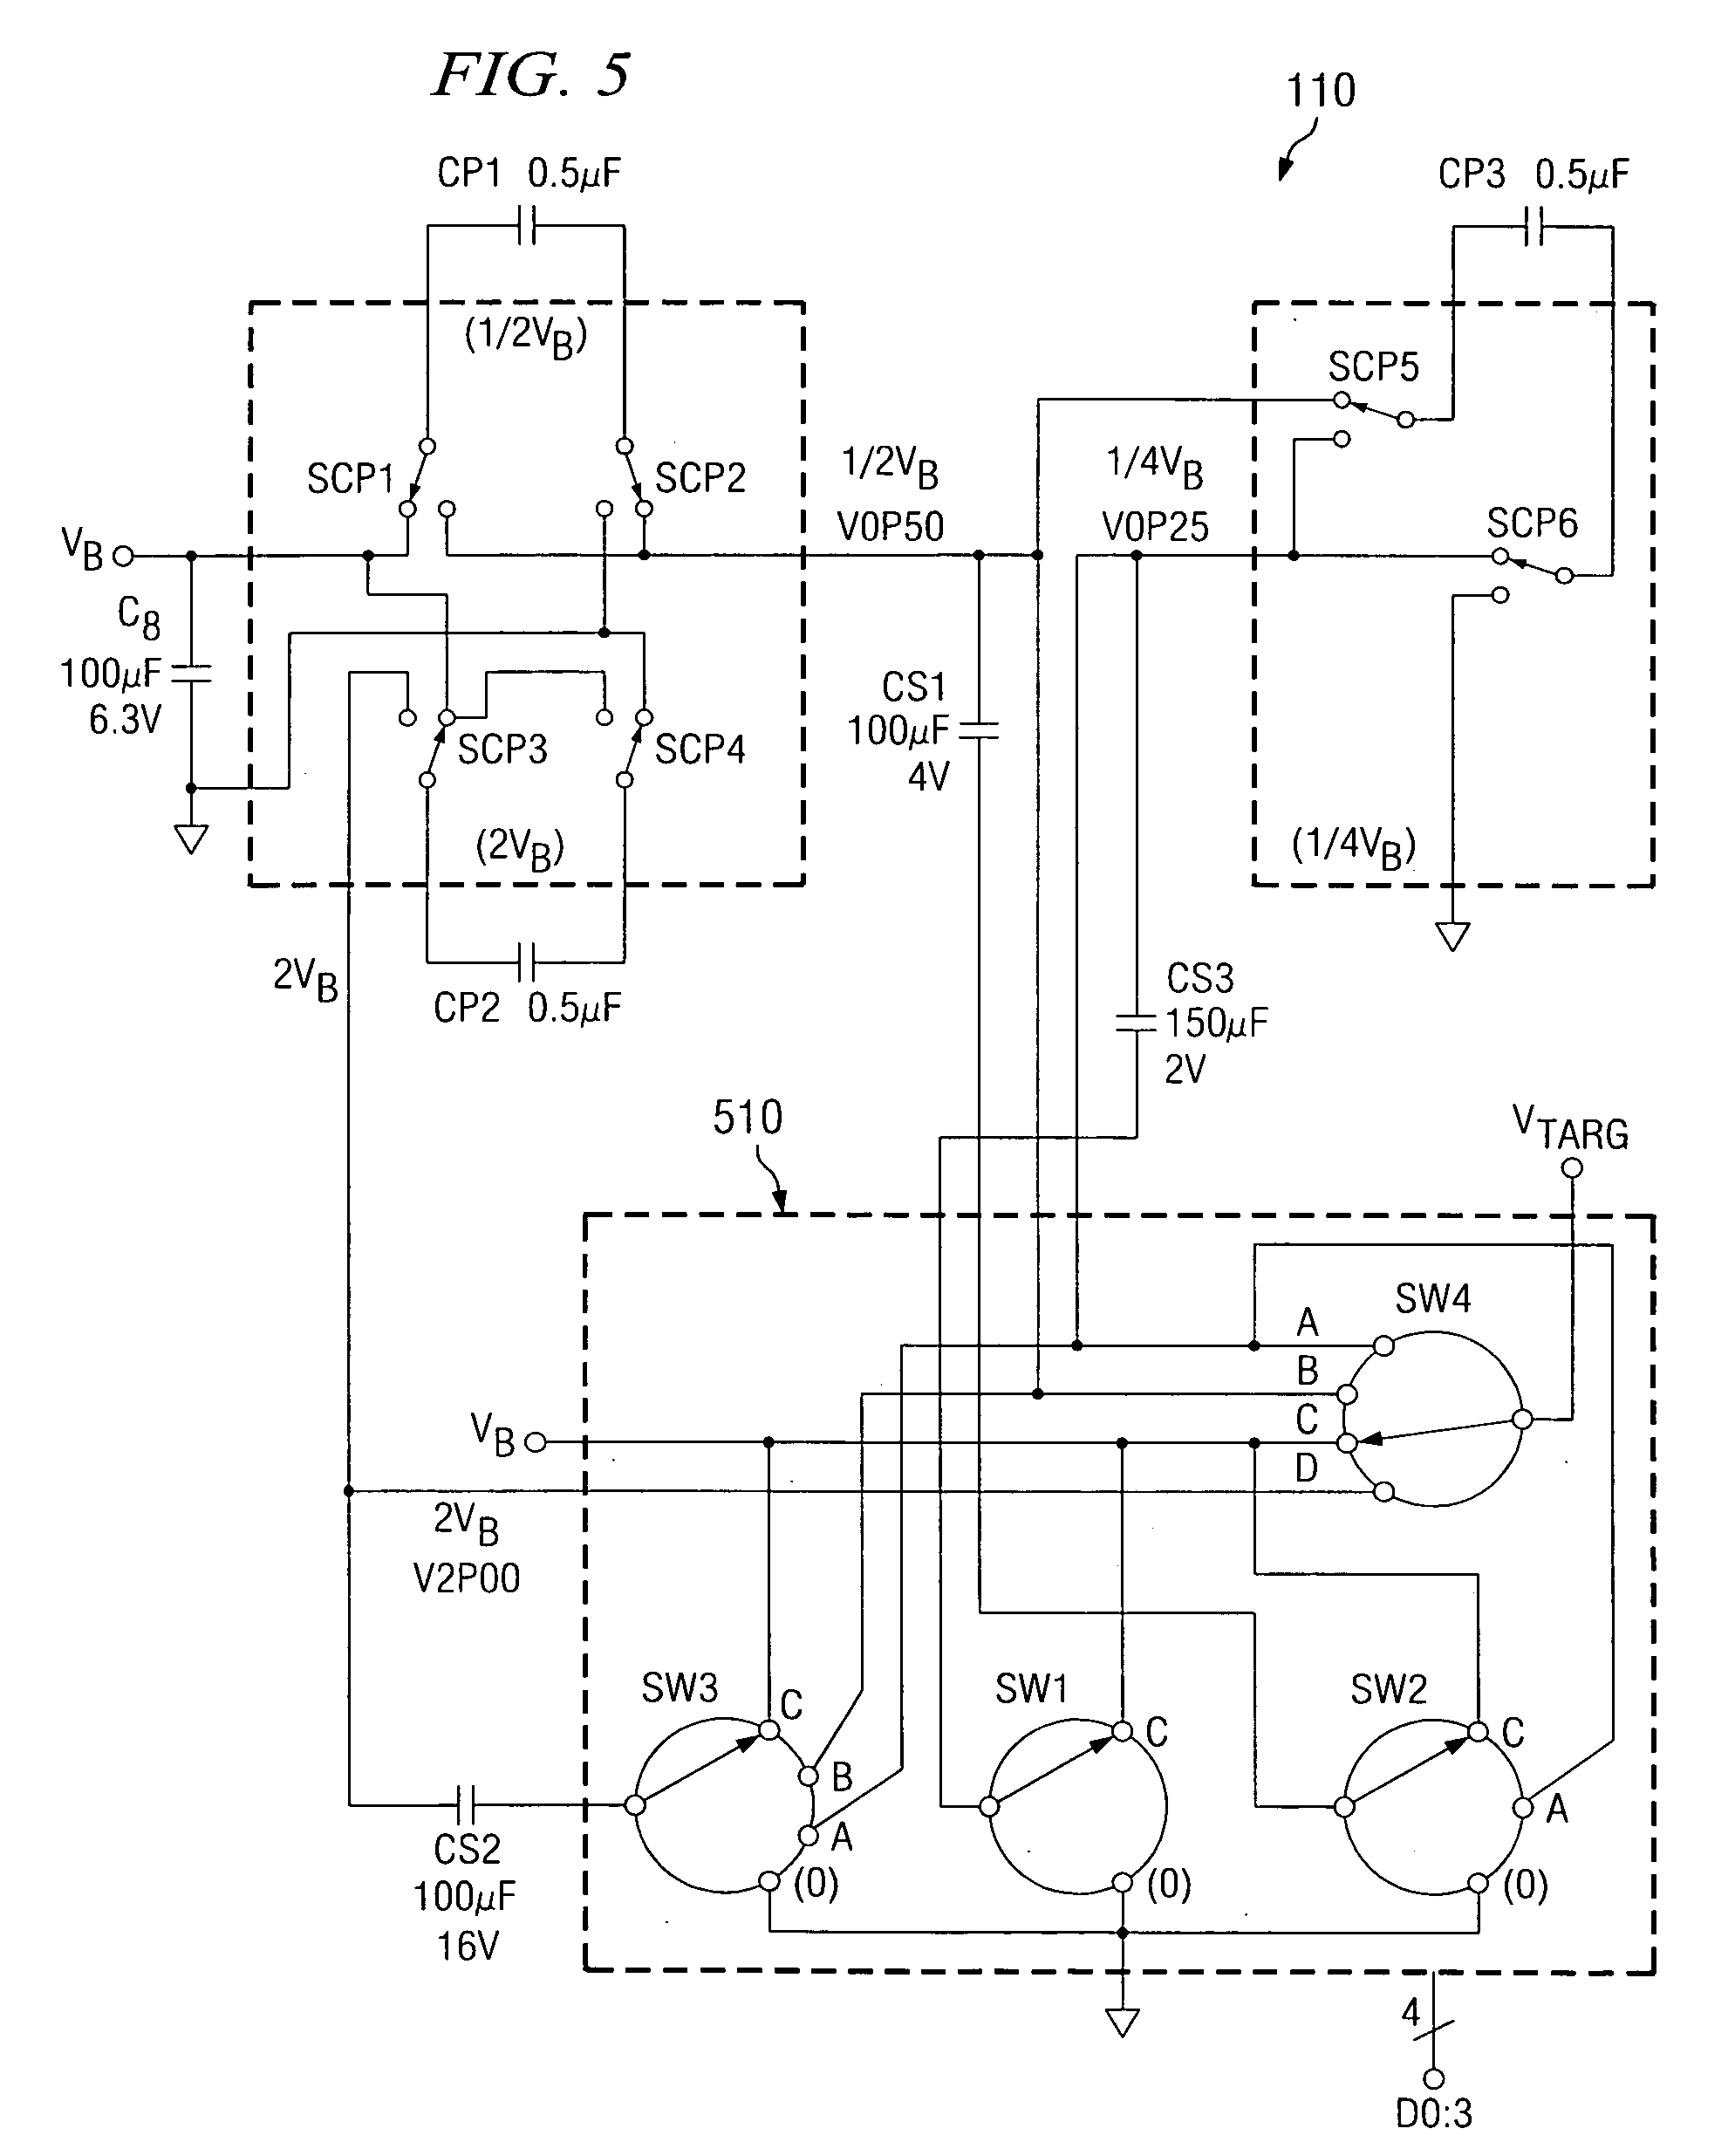 Pulse generator having an efficient fractional voltage converter and method of use